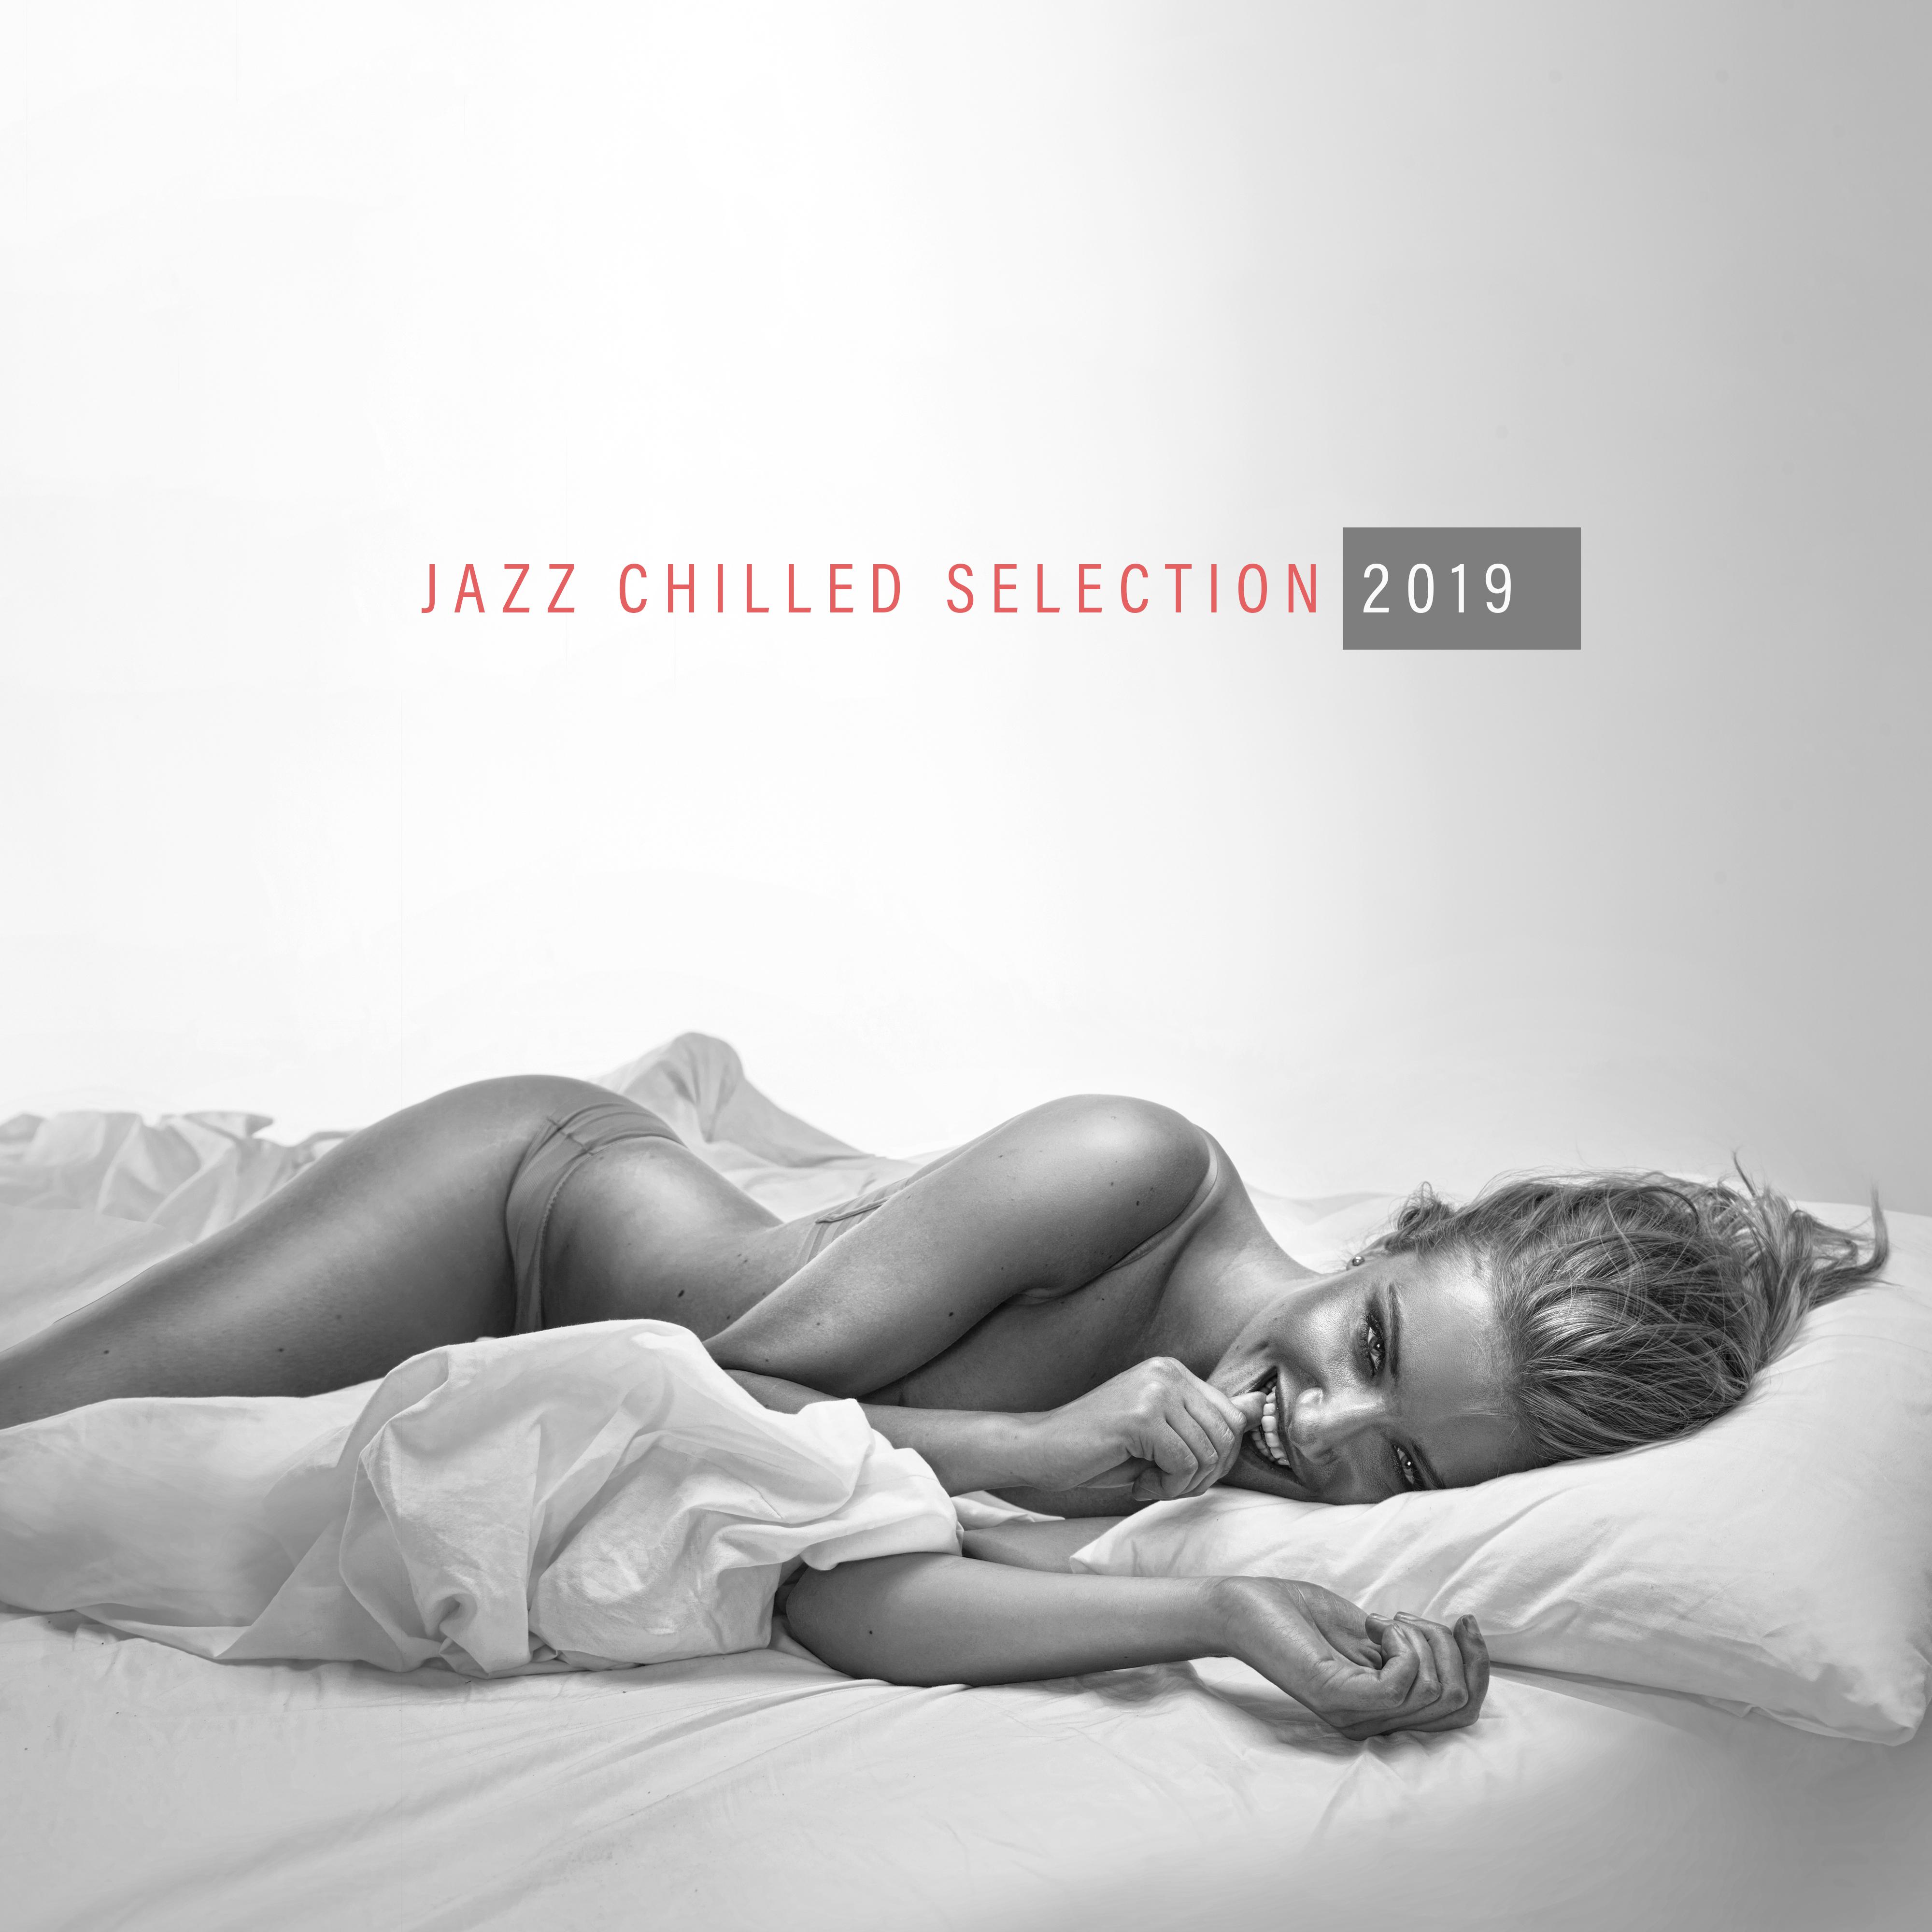 Jazz Chilled Selection 2019: 15 Instrumental Jazz Songs with Vintage Swing Melodies for Many Occasions